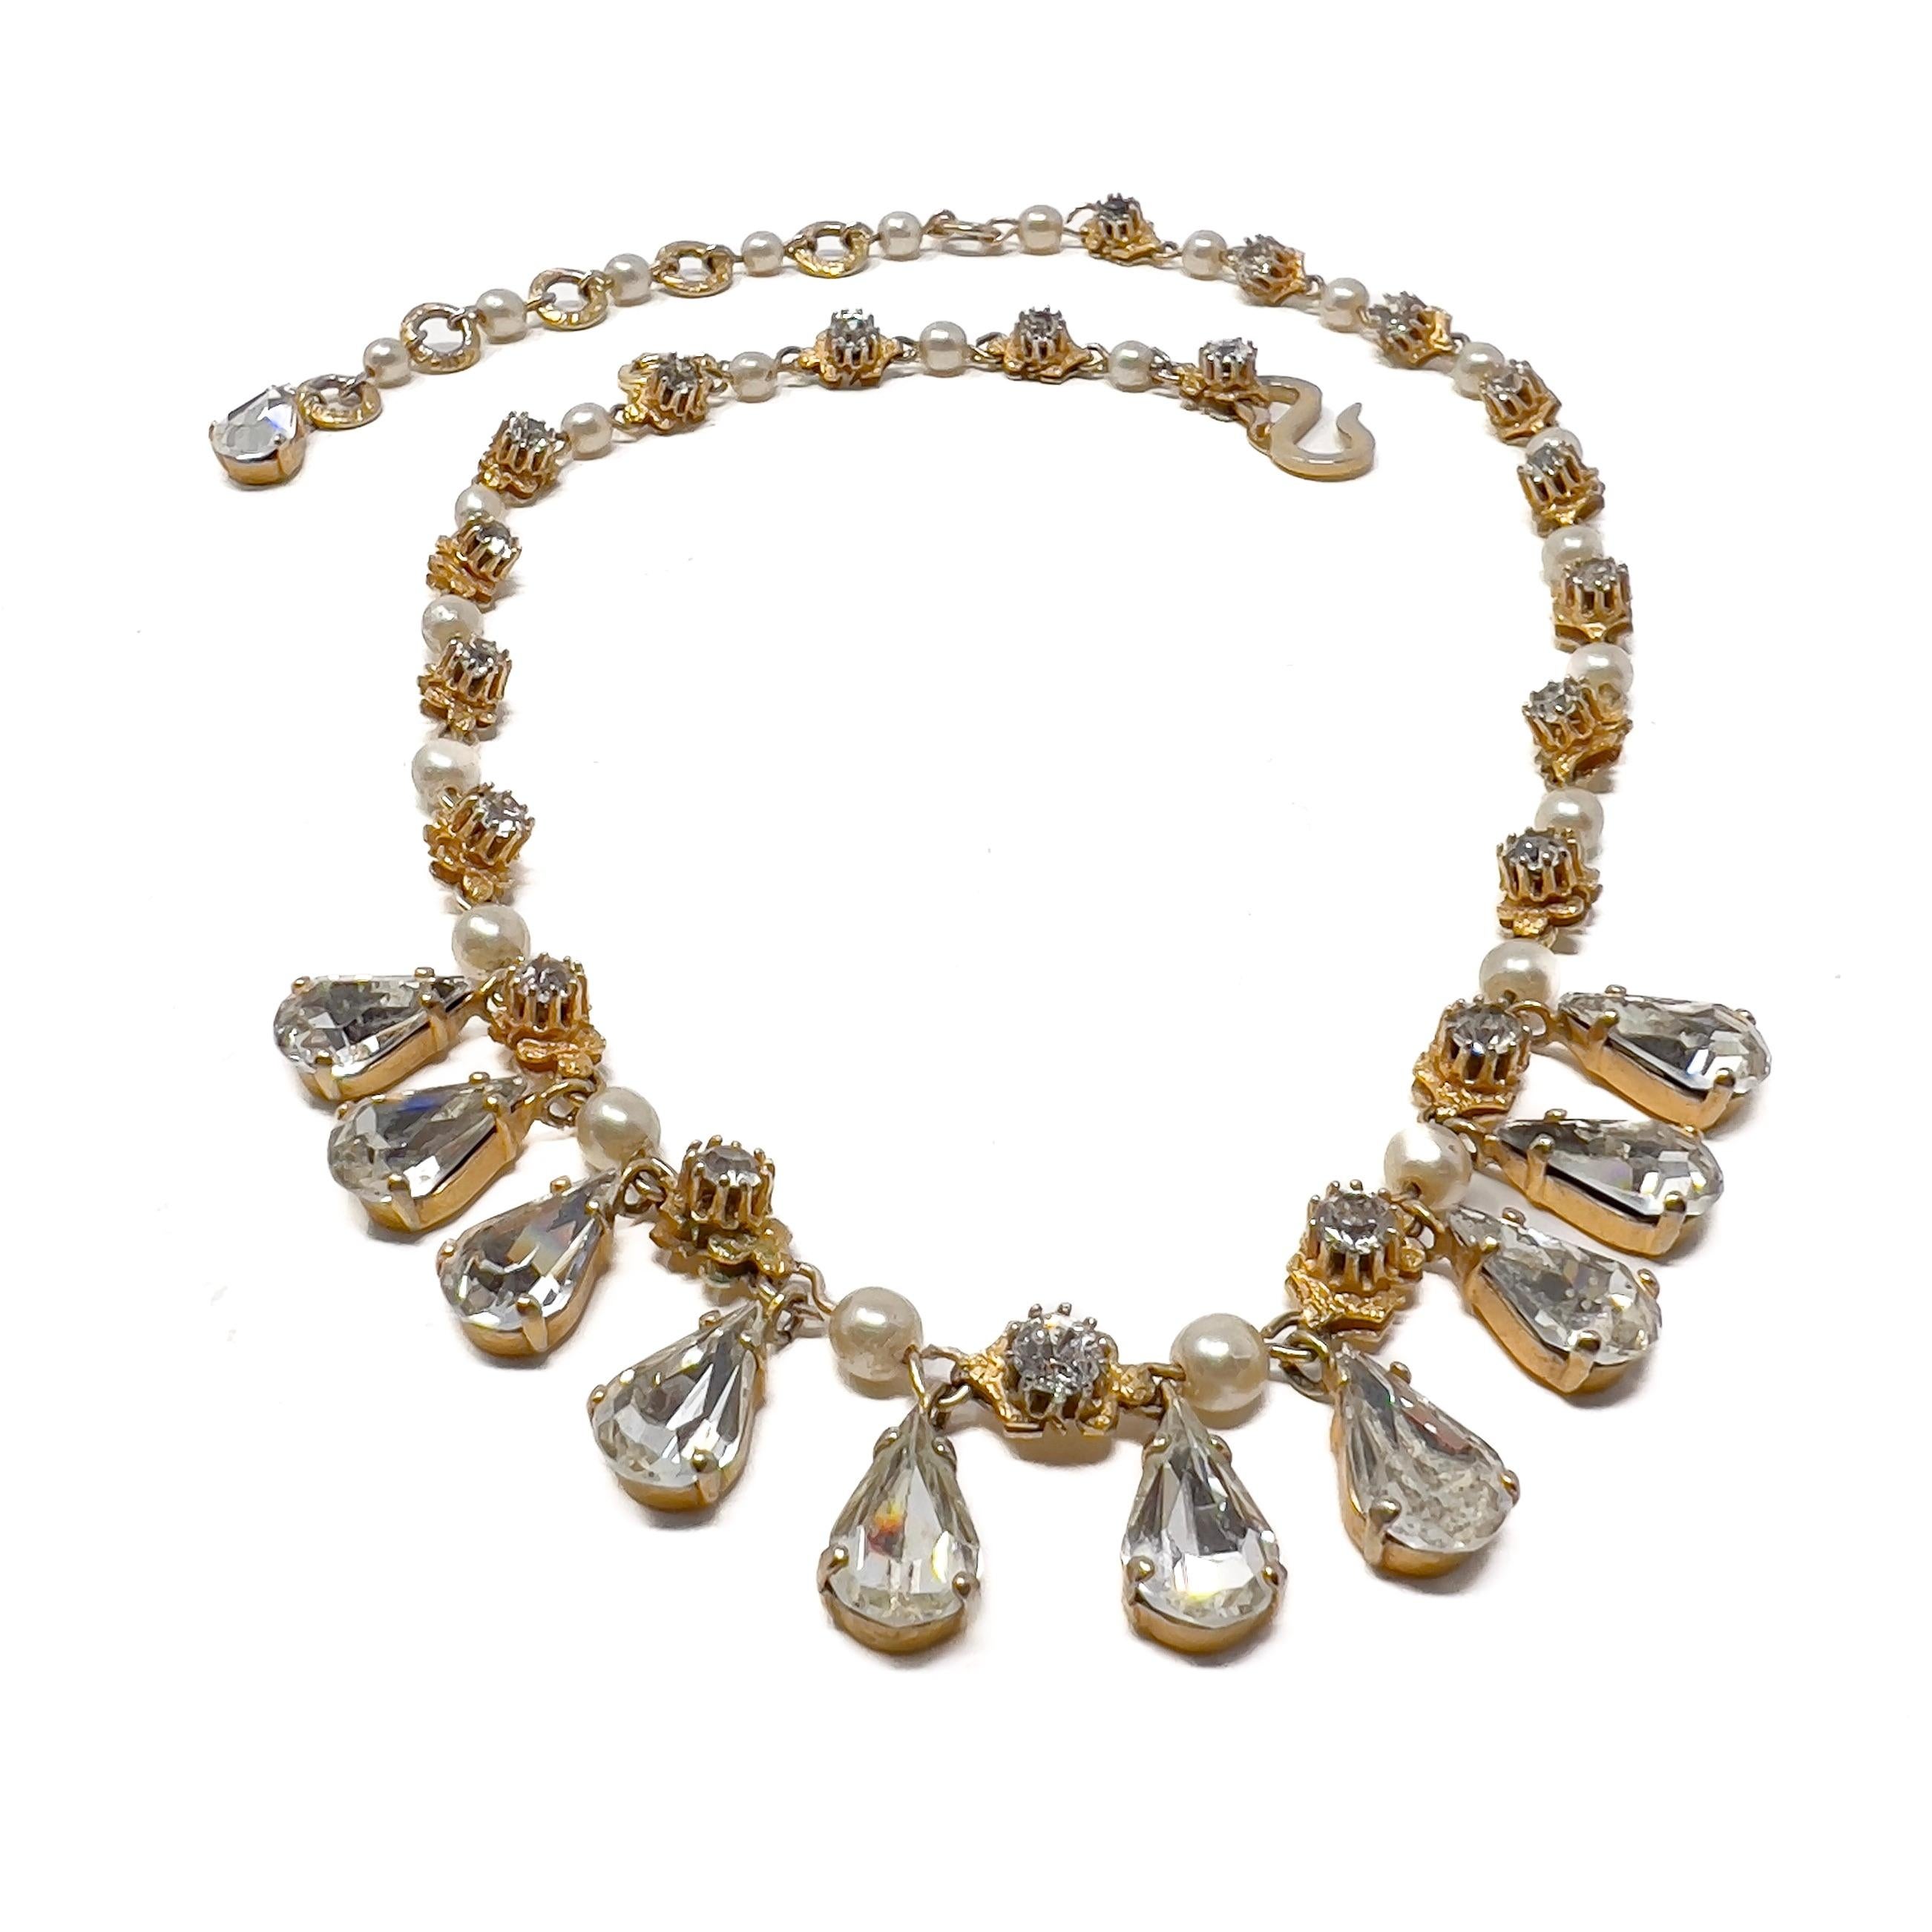 Christian Dior by Mitchel Maer 1952-1956 Vintage Rhinestone and Pearl Necklace For Sale 1